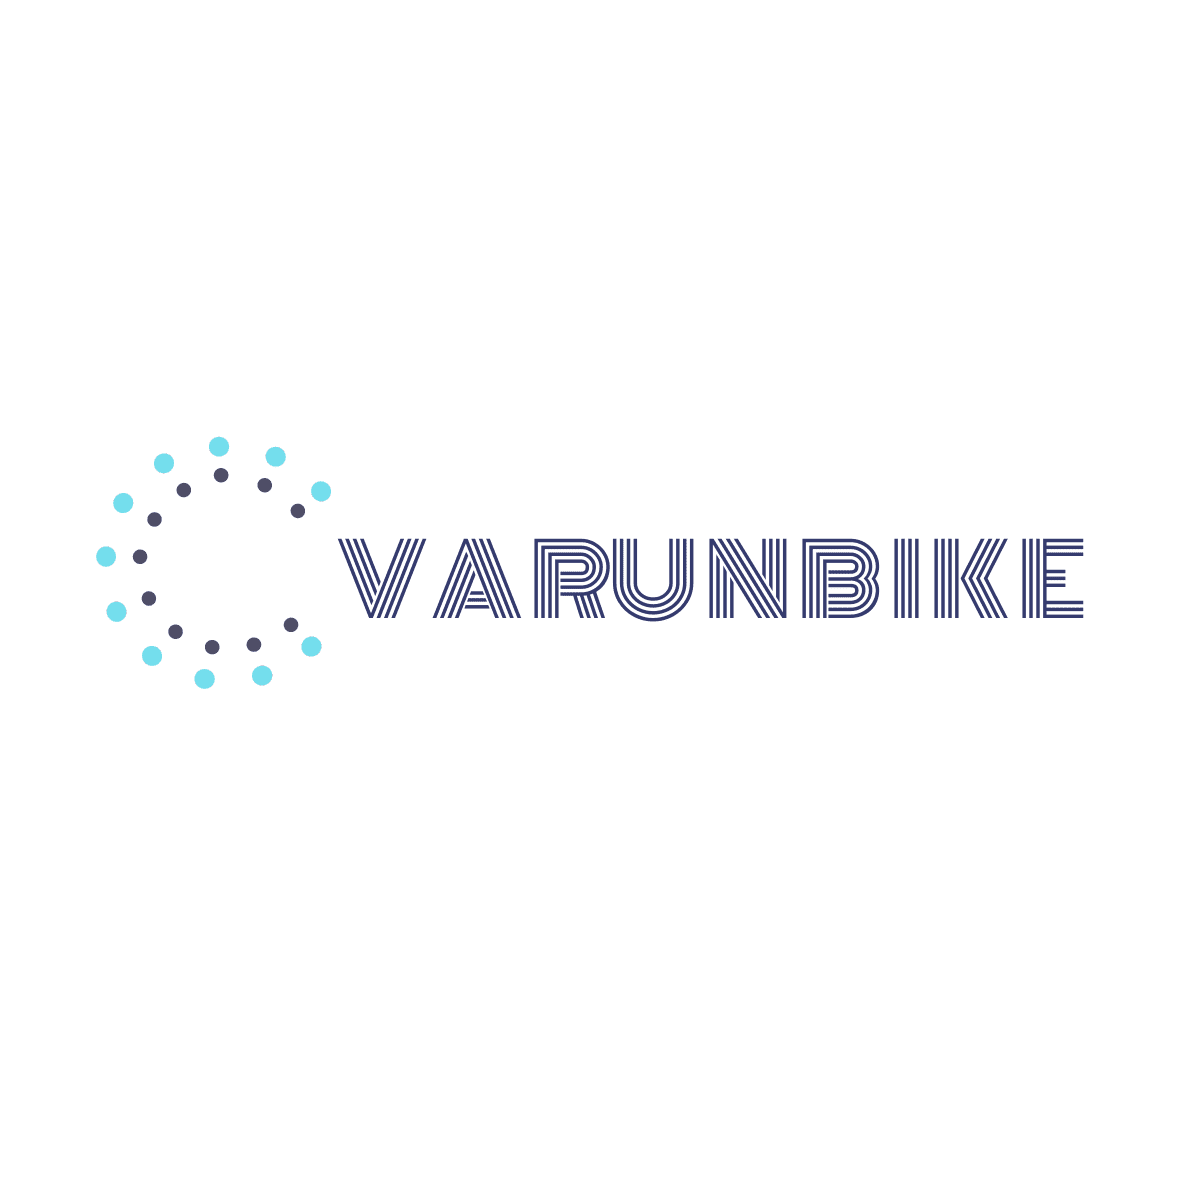 We welcome anyone to join the Varun electric bicycle family, and we advocate for green transportation and protecting our environment together.